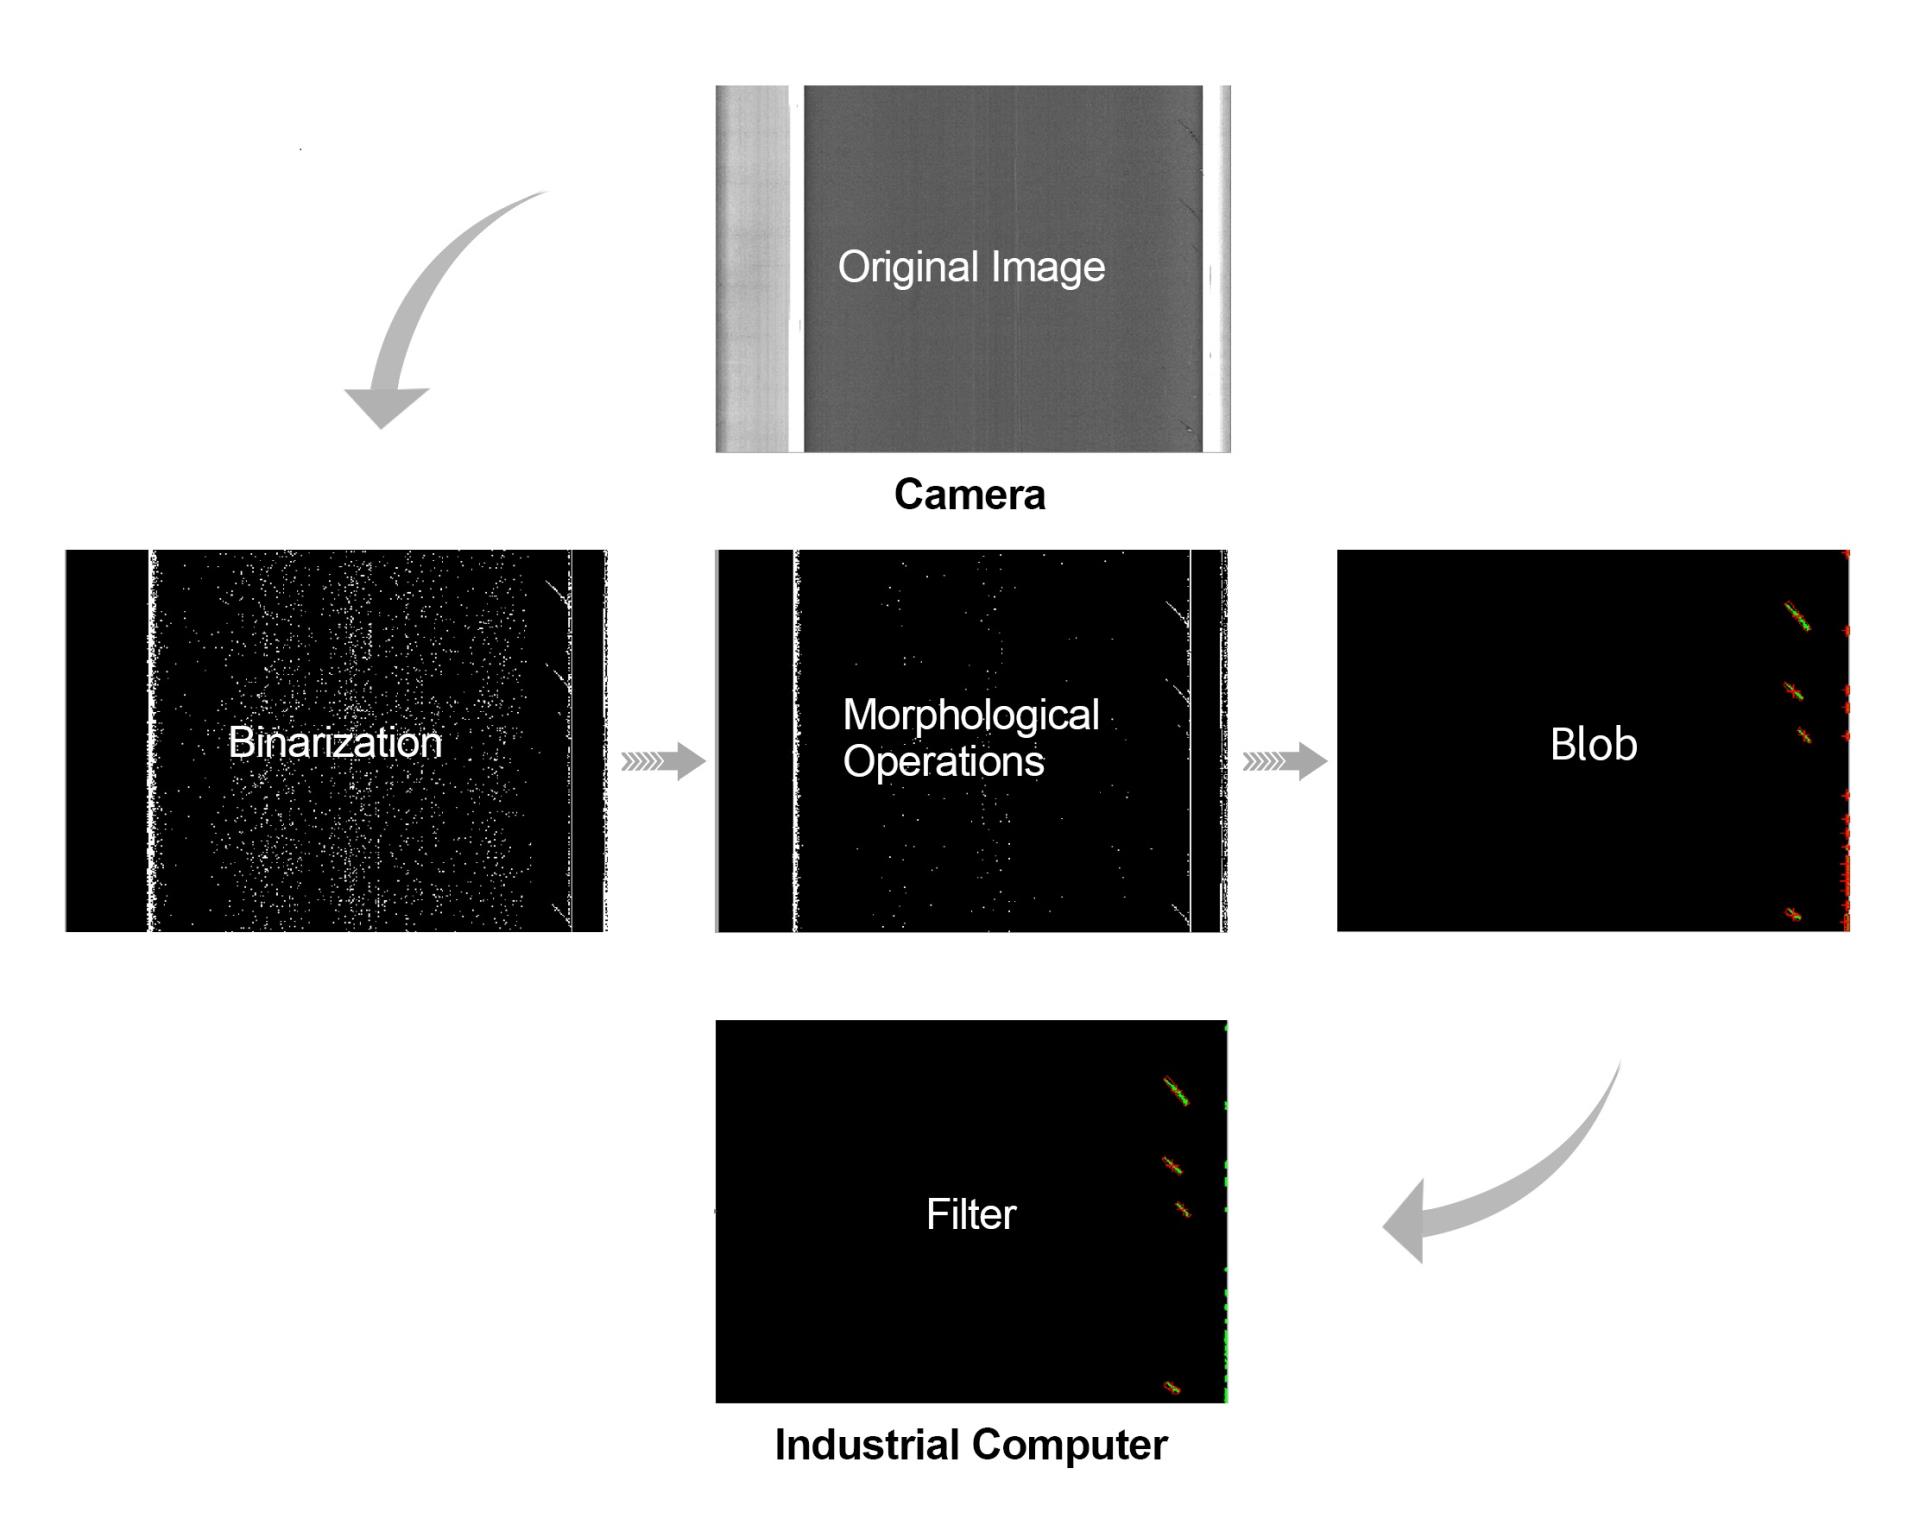 5-Schematic Representation of the Real-Time Image Processing of an OPT Line Scan Camera